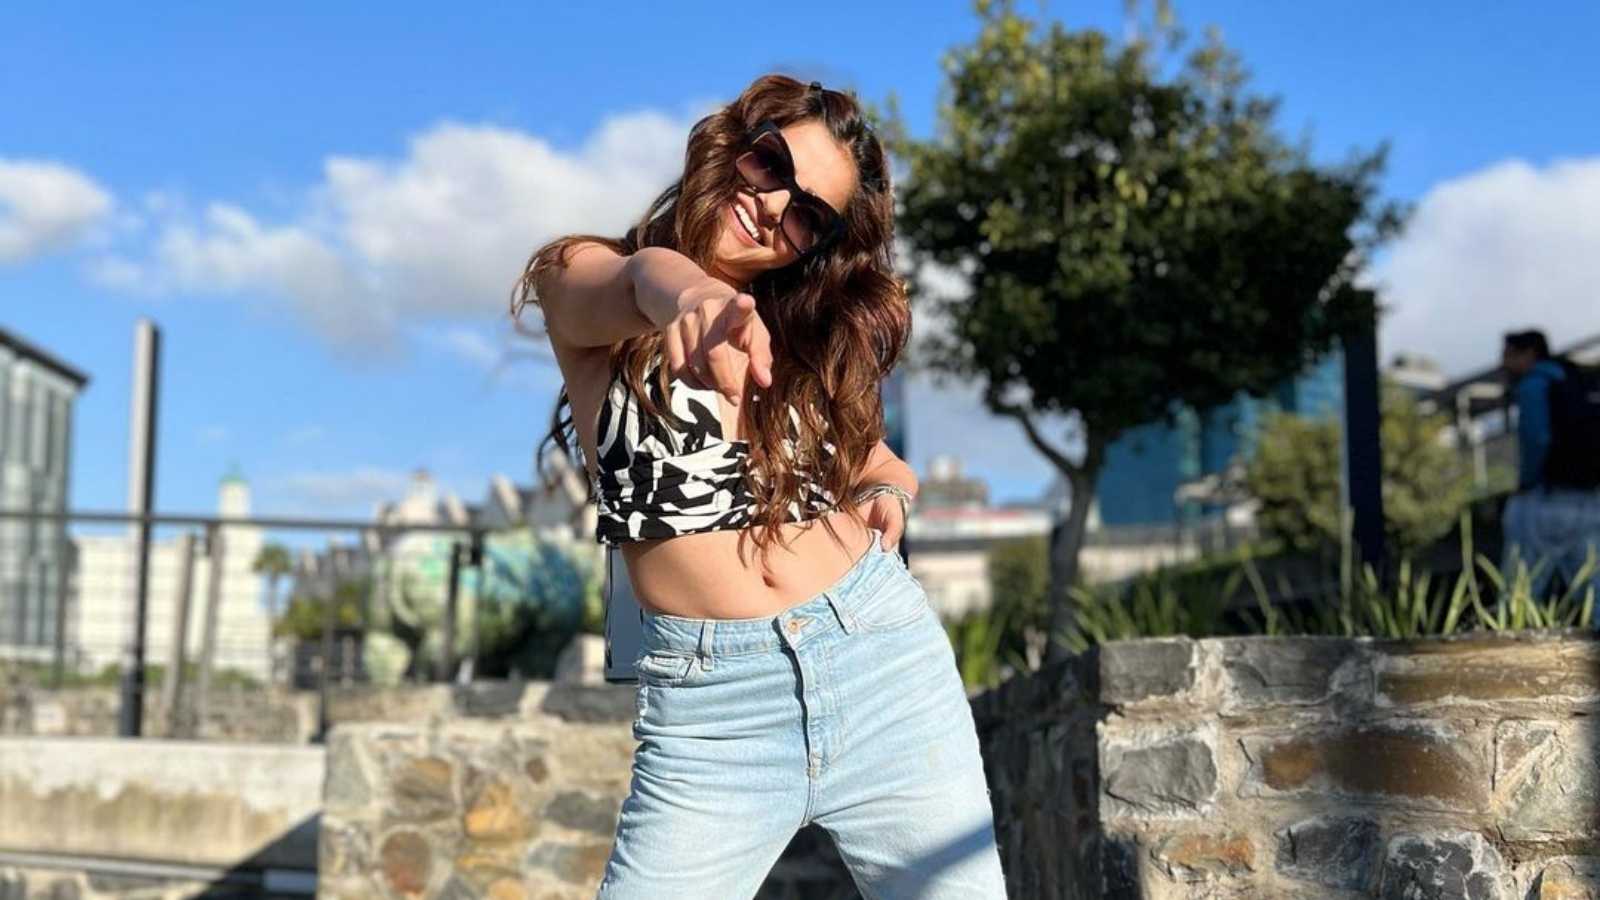 Rubina Dilaik confirms being a part of Jhalak Dilkhhla Jaa 10 but here's the big challenge